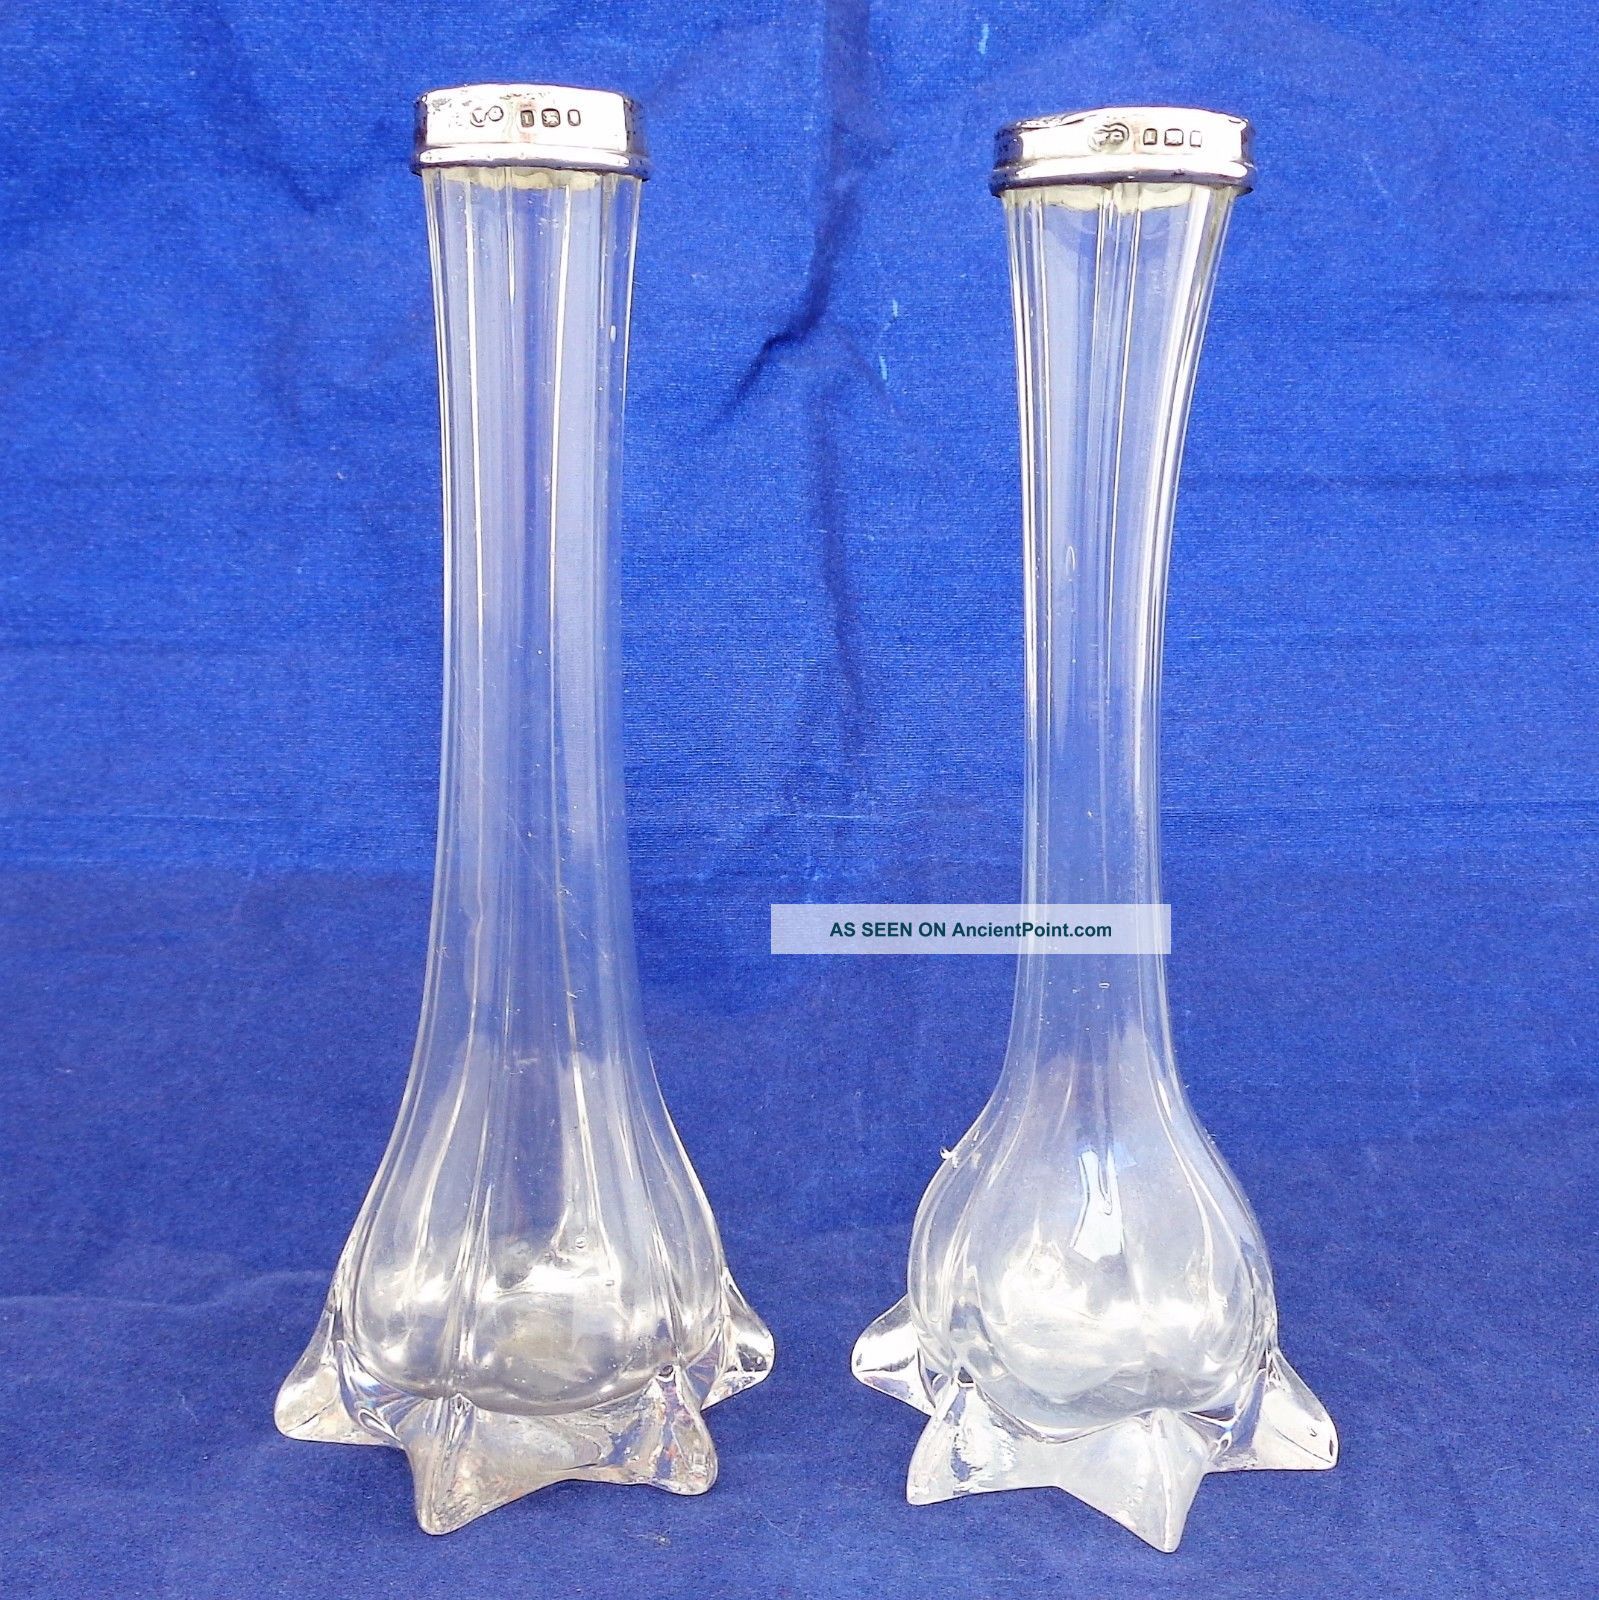 Antique Silver Topped Clear Glass Posy Or Bud Vases Hm London 1926 - 27 Vases & Urns photo